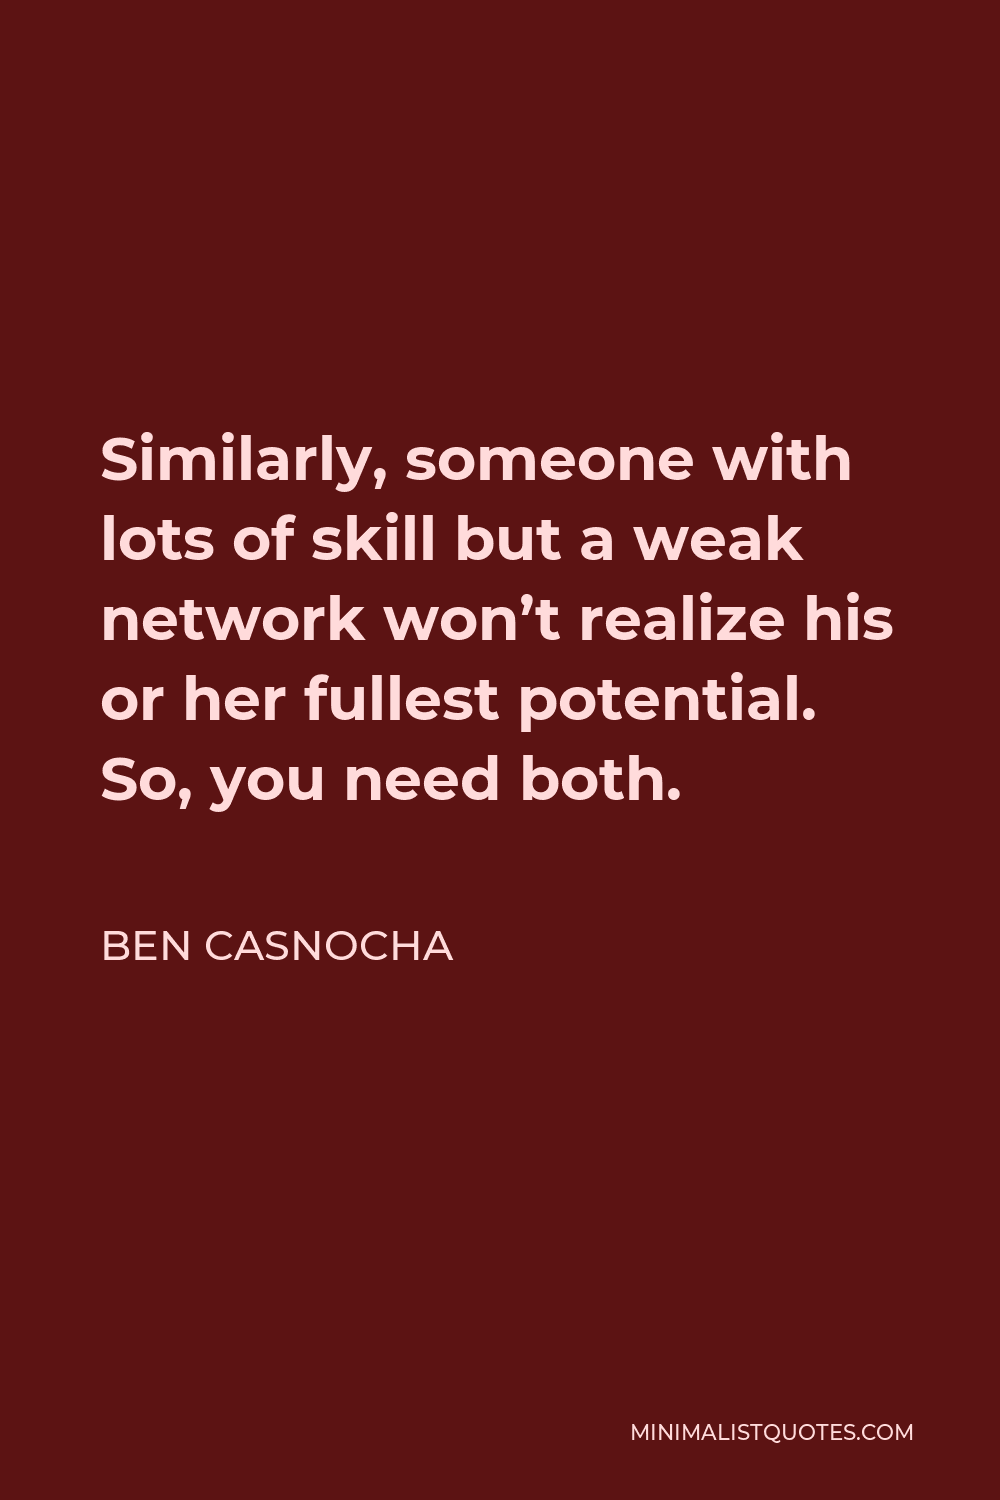 Ben Casnocha Quote - Similarly, someone with lots of skill but a weak network won’t realize his or her fullest potential. So, you need both.